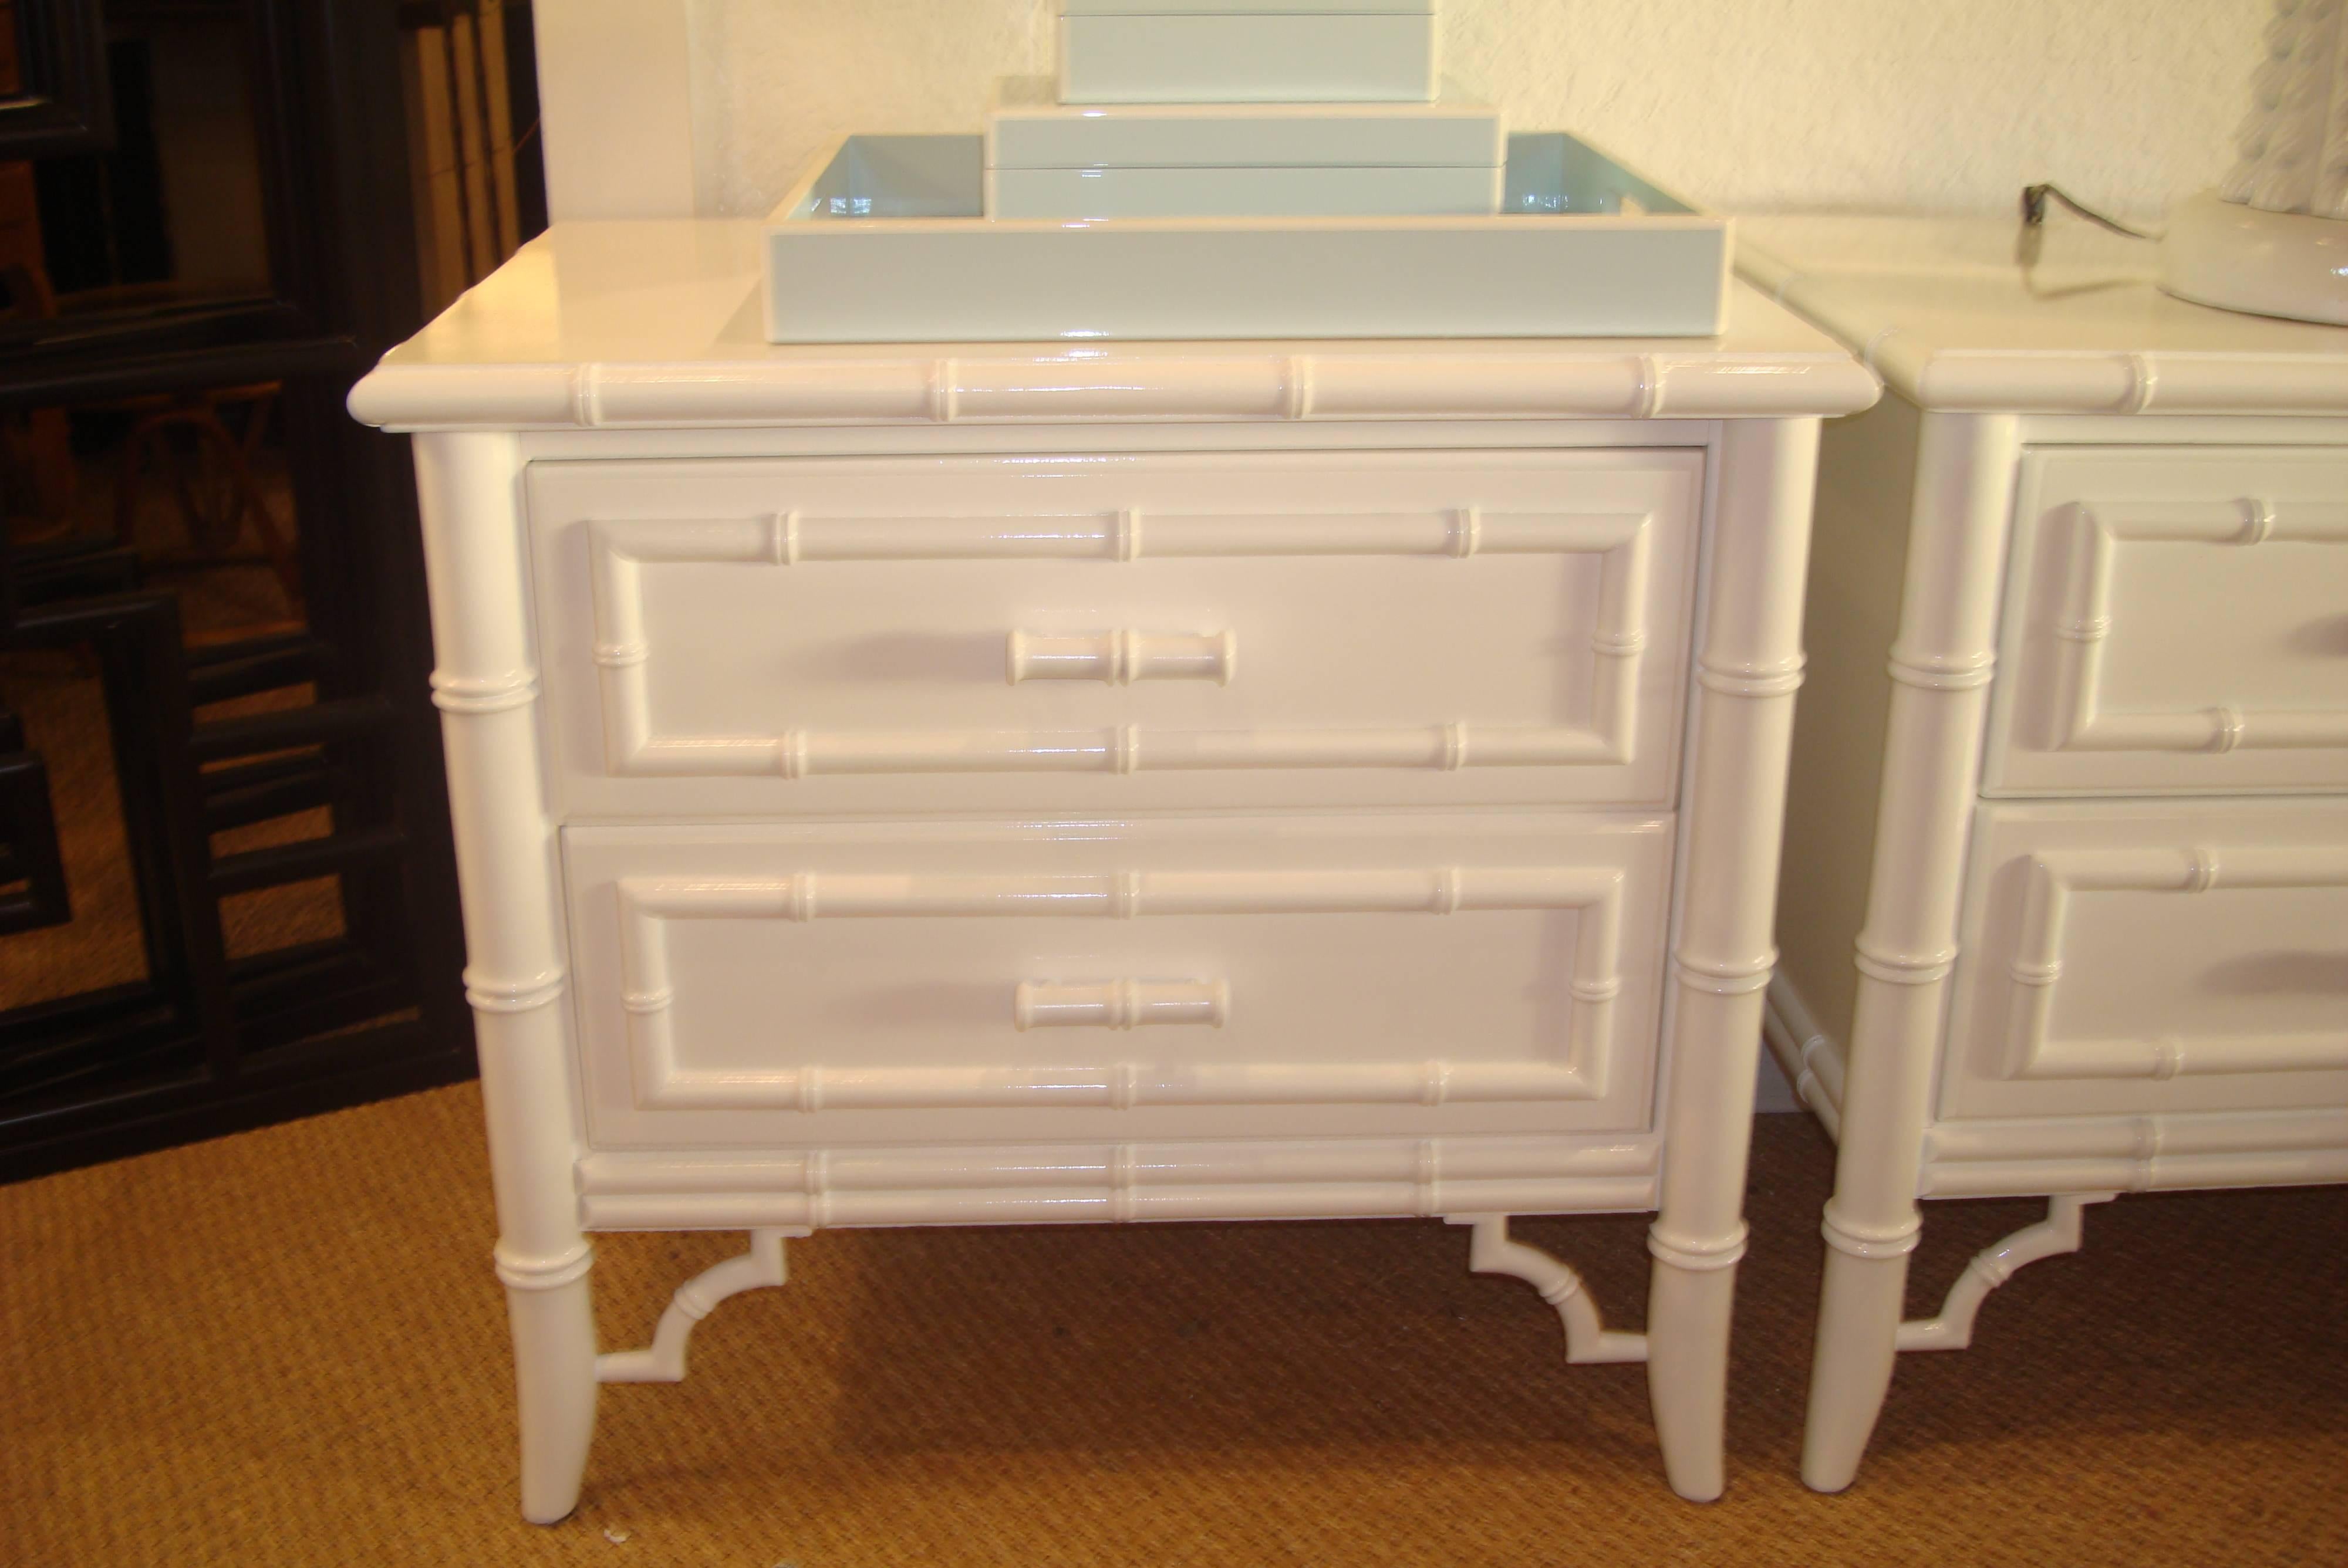 Pair of Newly Lacquered White Gloss Two Drawer Side Dressers. Faux Bamboo Frame with Fretwork Detail and Faux Bamboo Pulls. Finished Interior Drawers